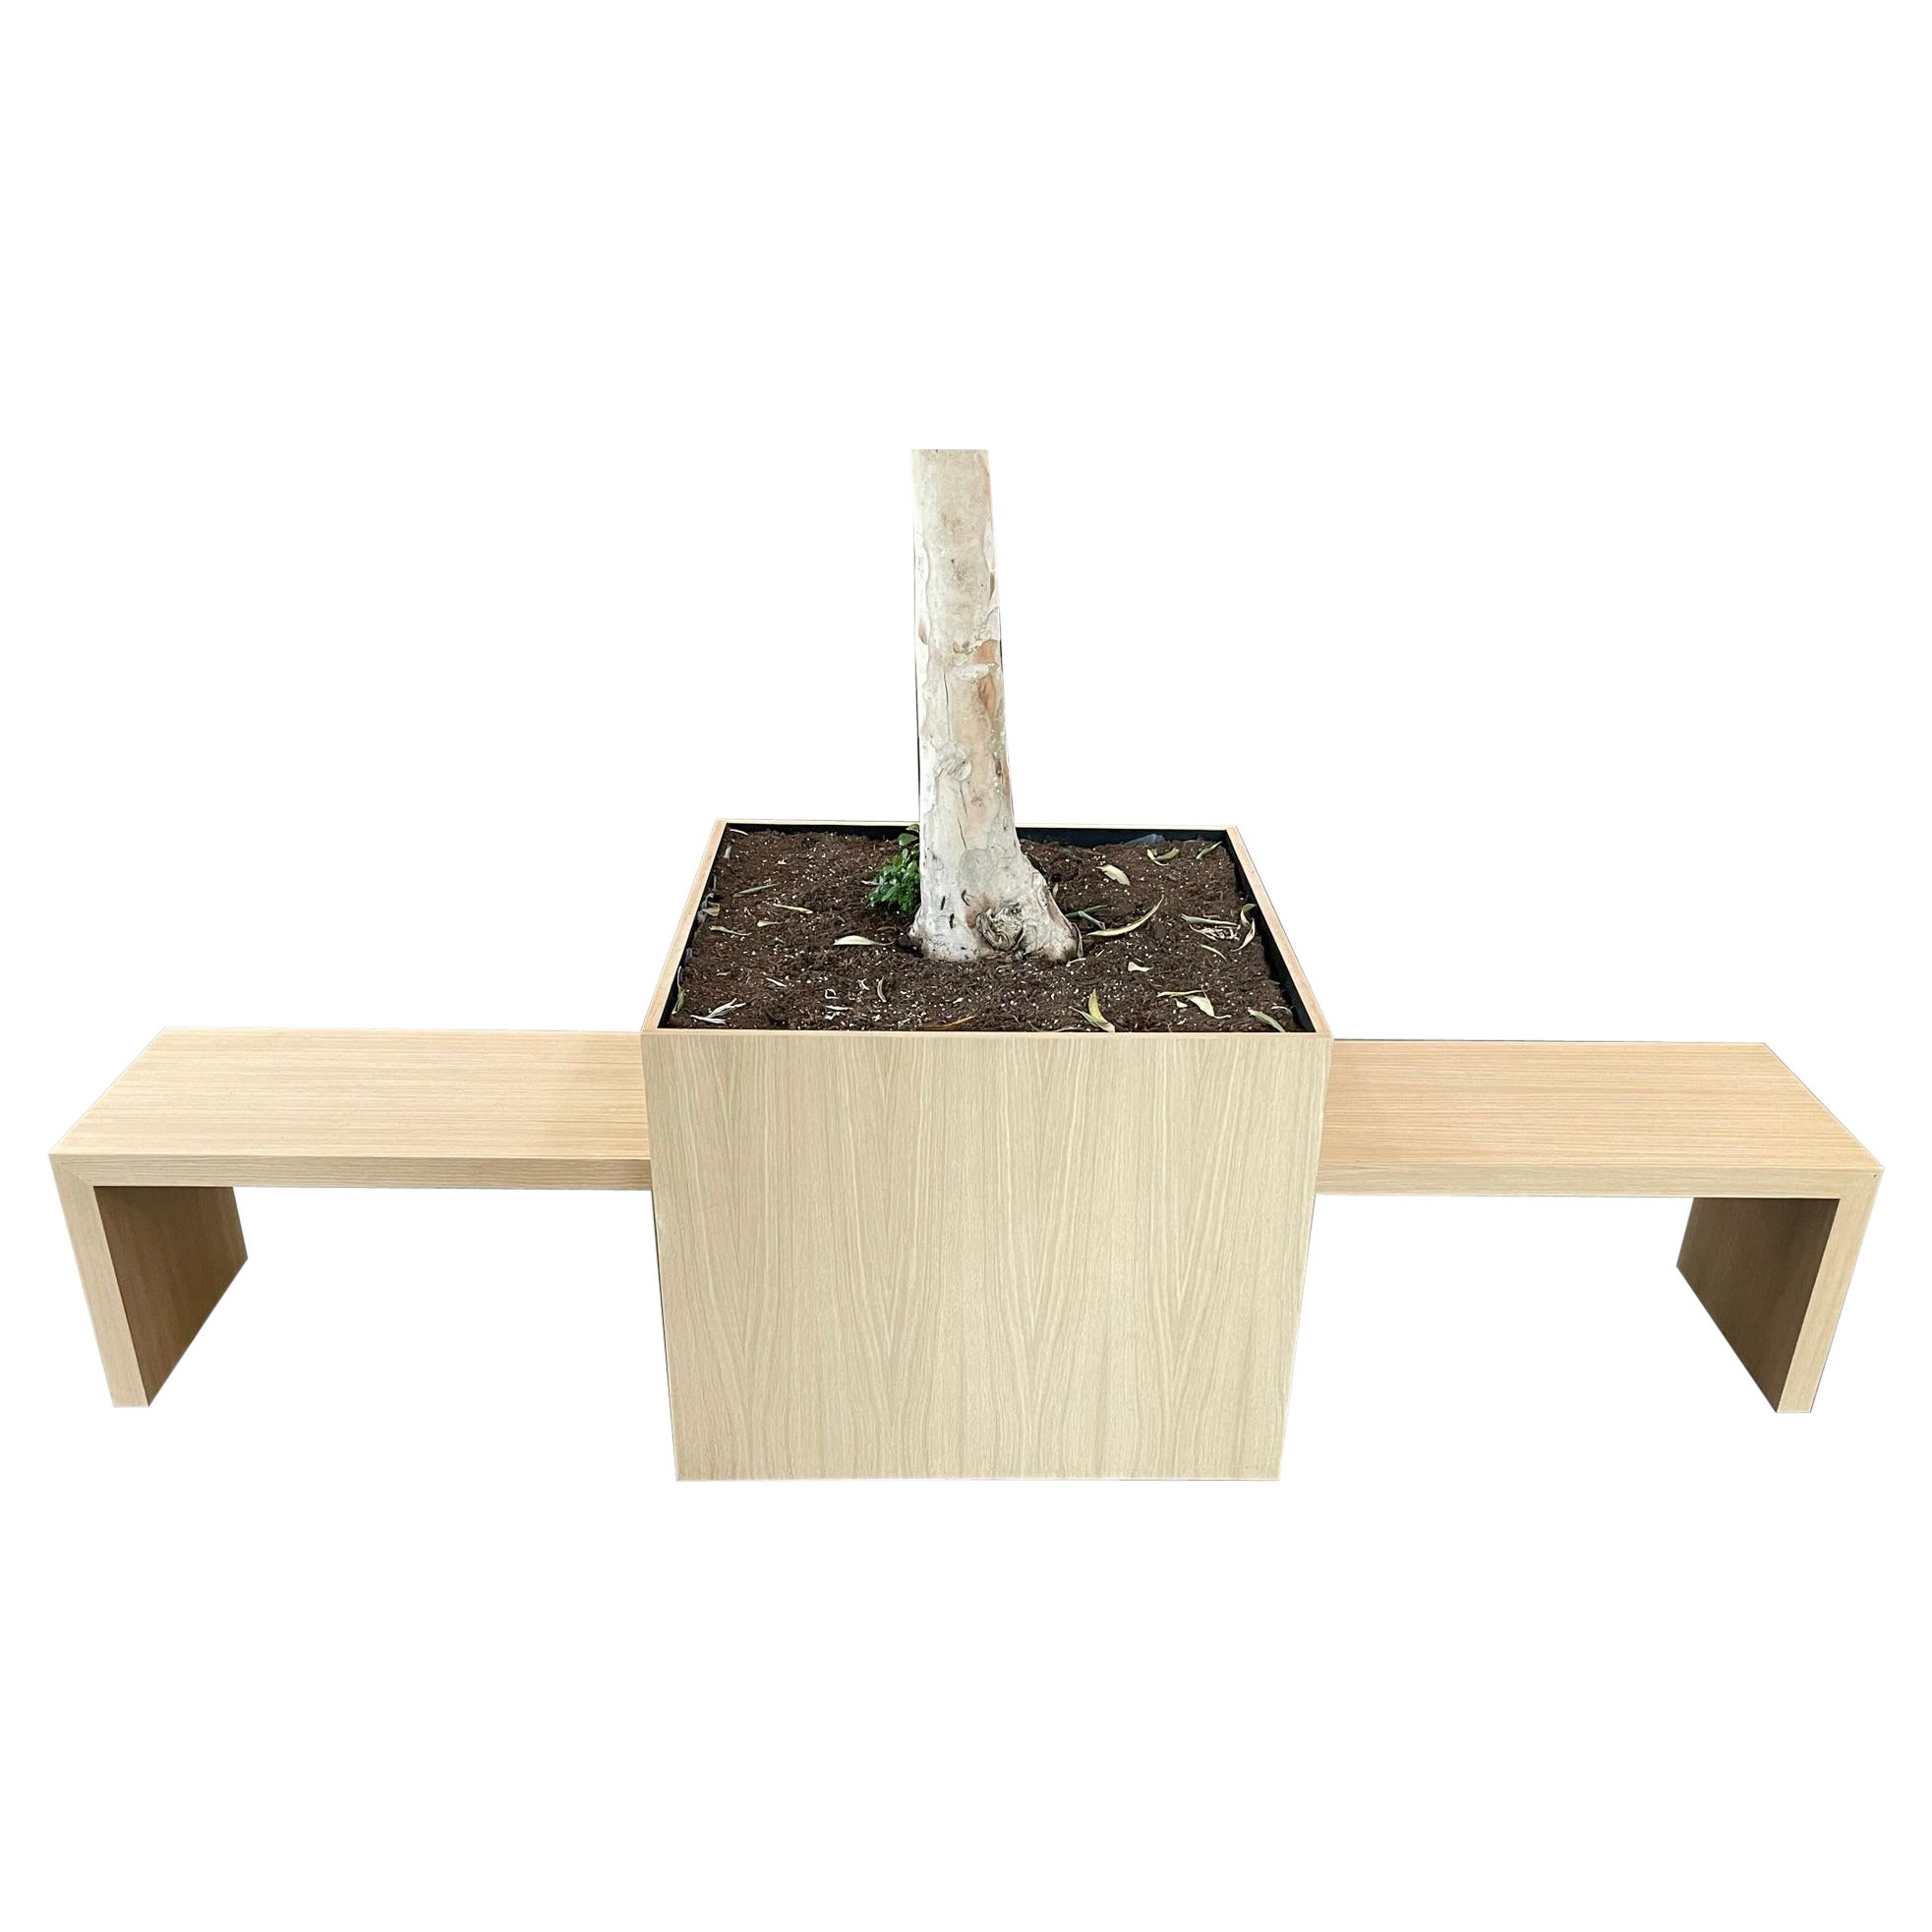 "M" White Oak Planter with Integrated Benches by Cain Studio, USA Made For Sale